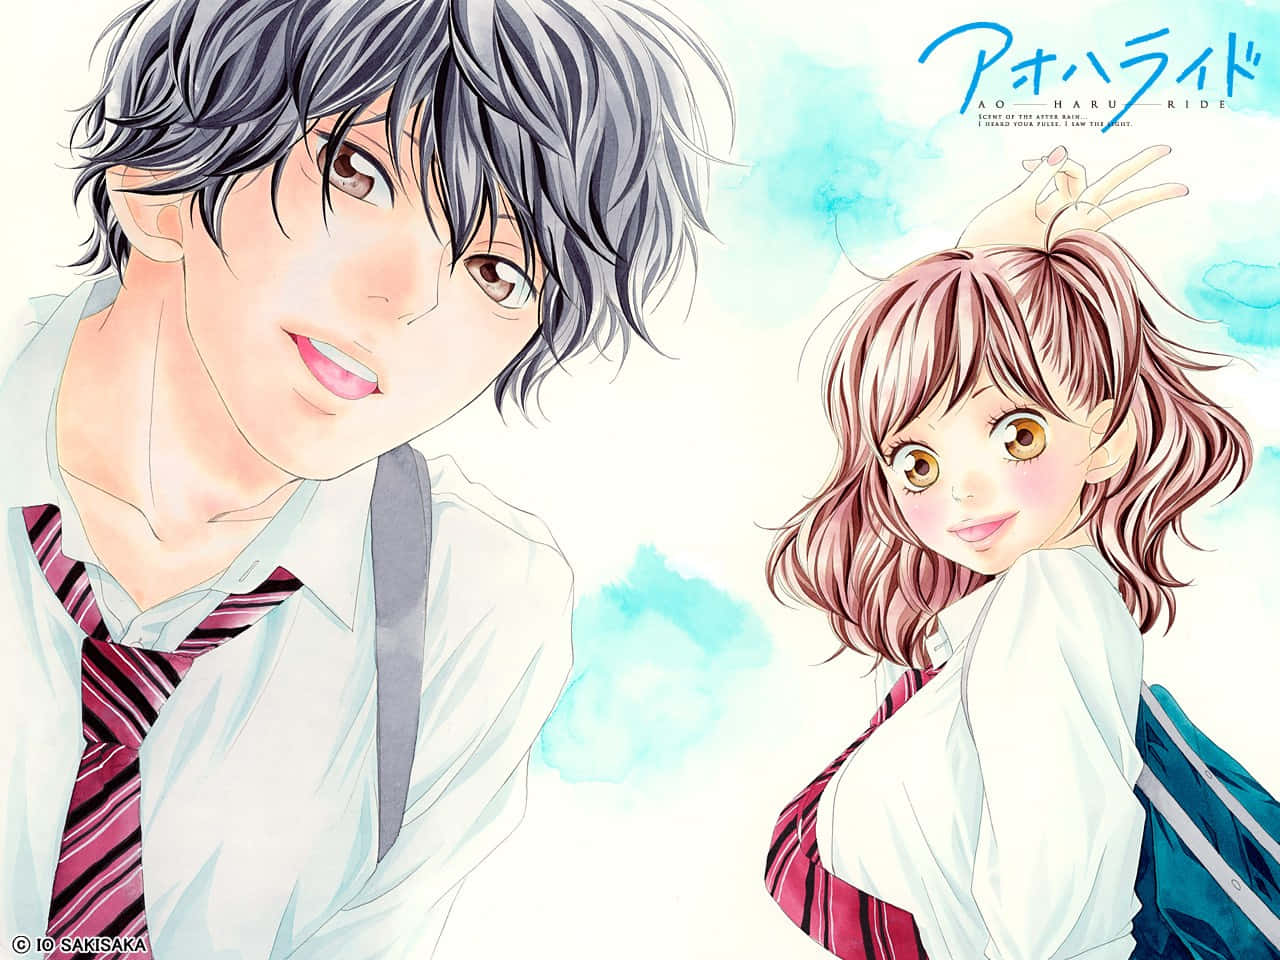 A Moment of Promise in Ao Haru Ride